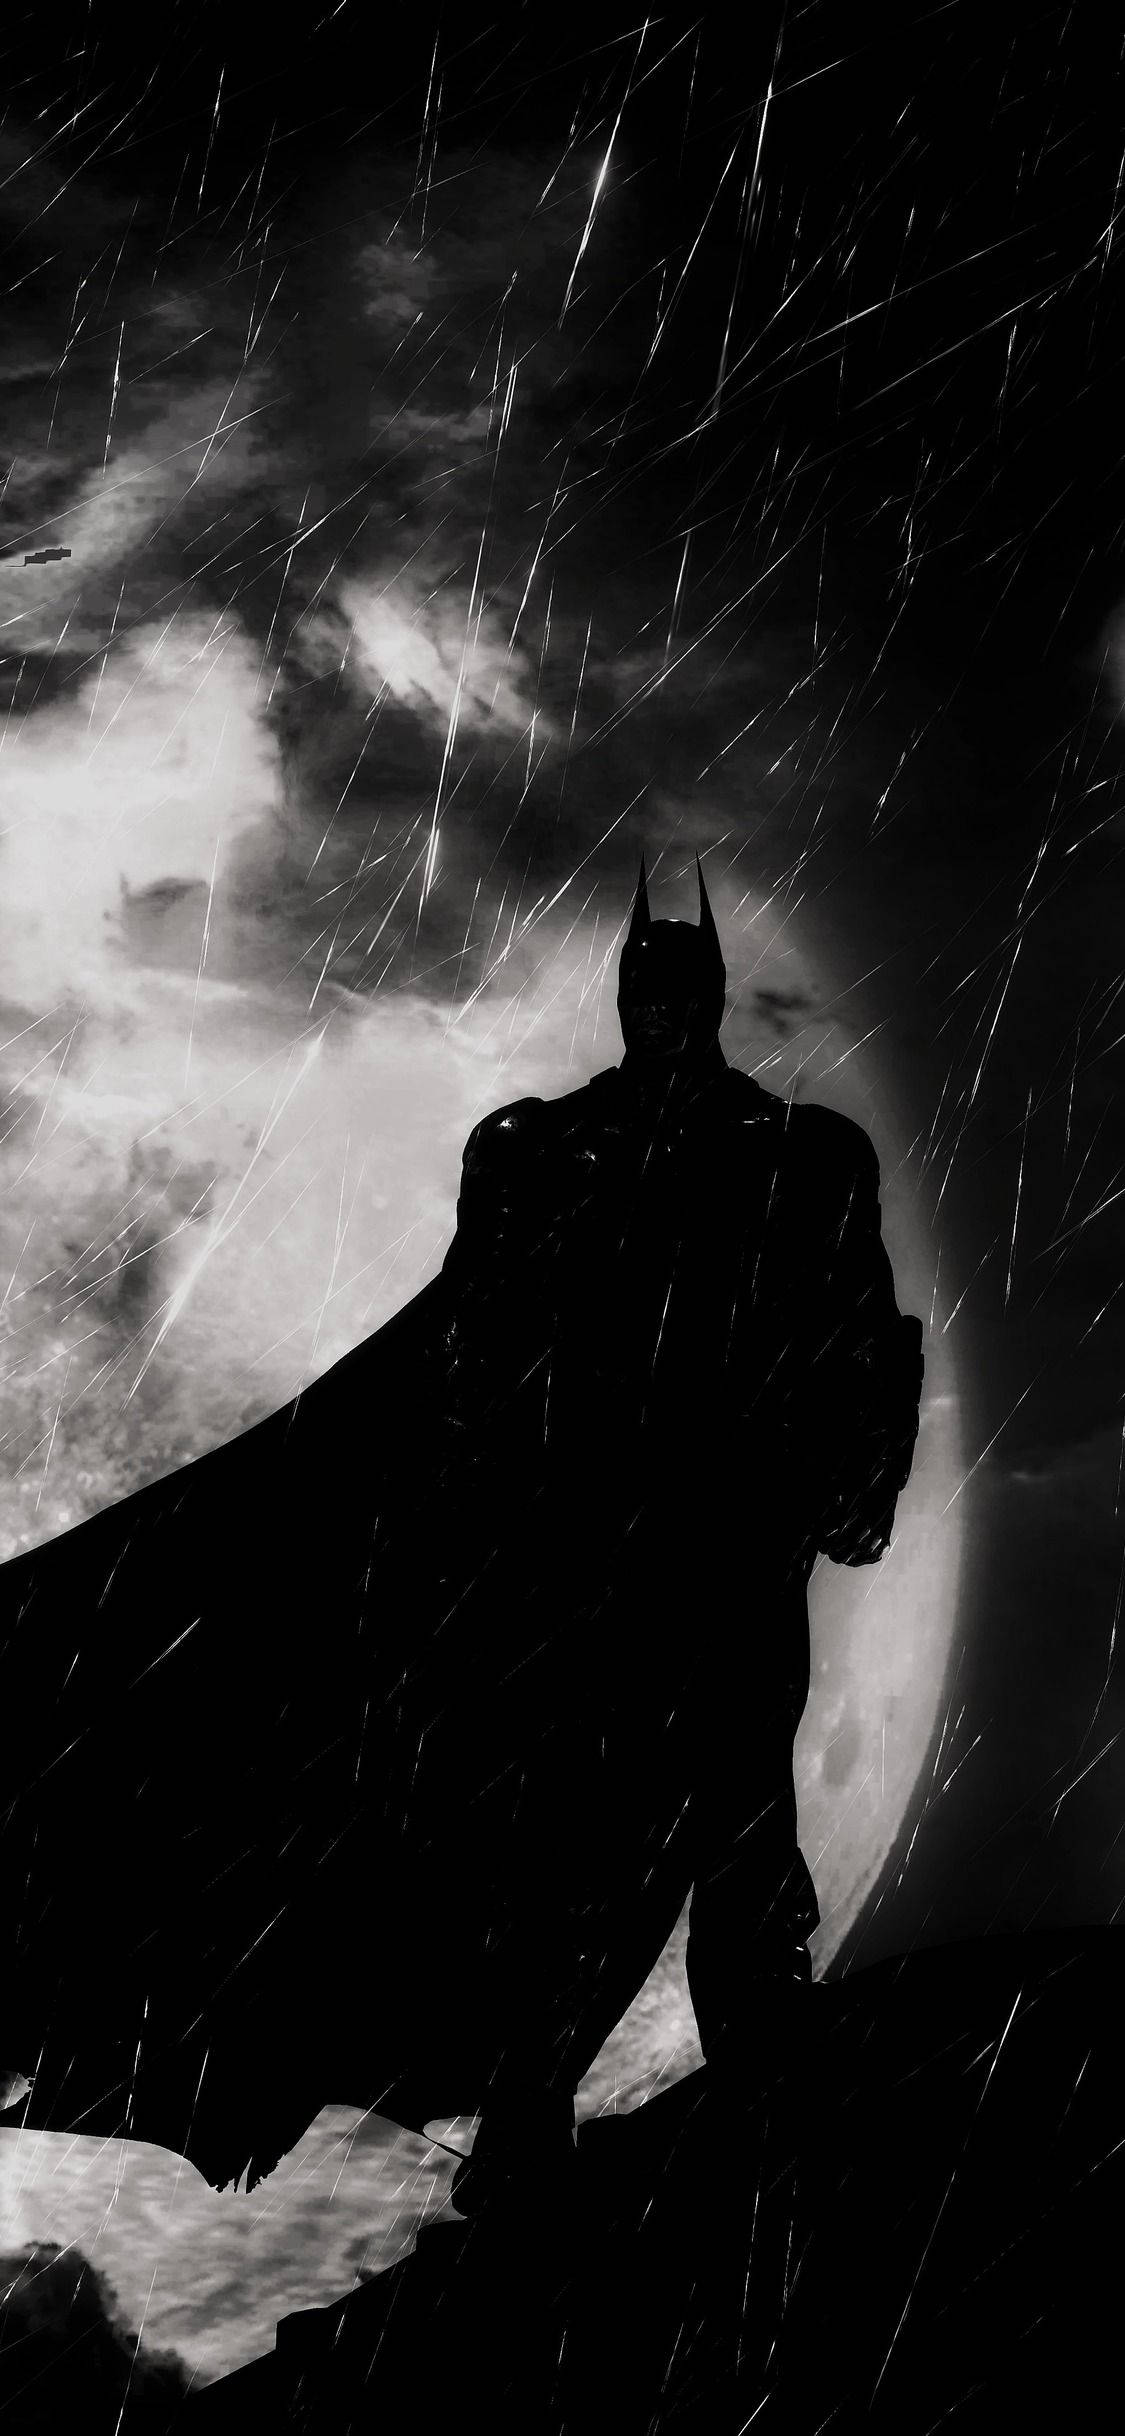 100+] Batman Black And White Wallpapers | Wallpapers.com